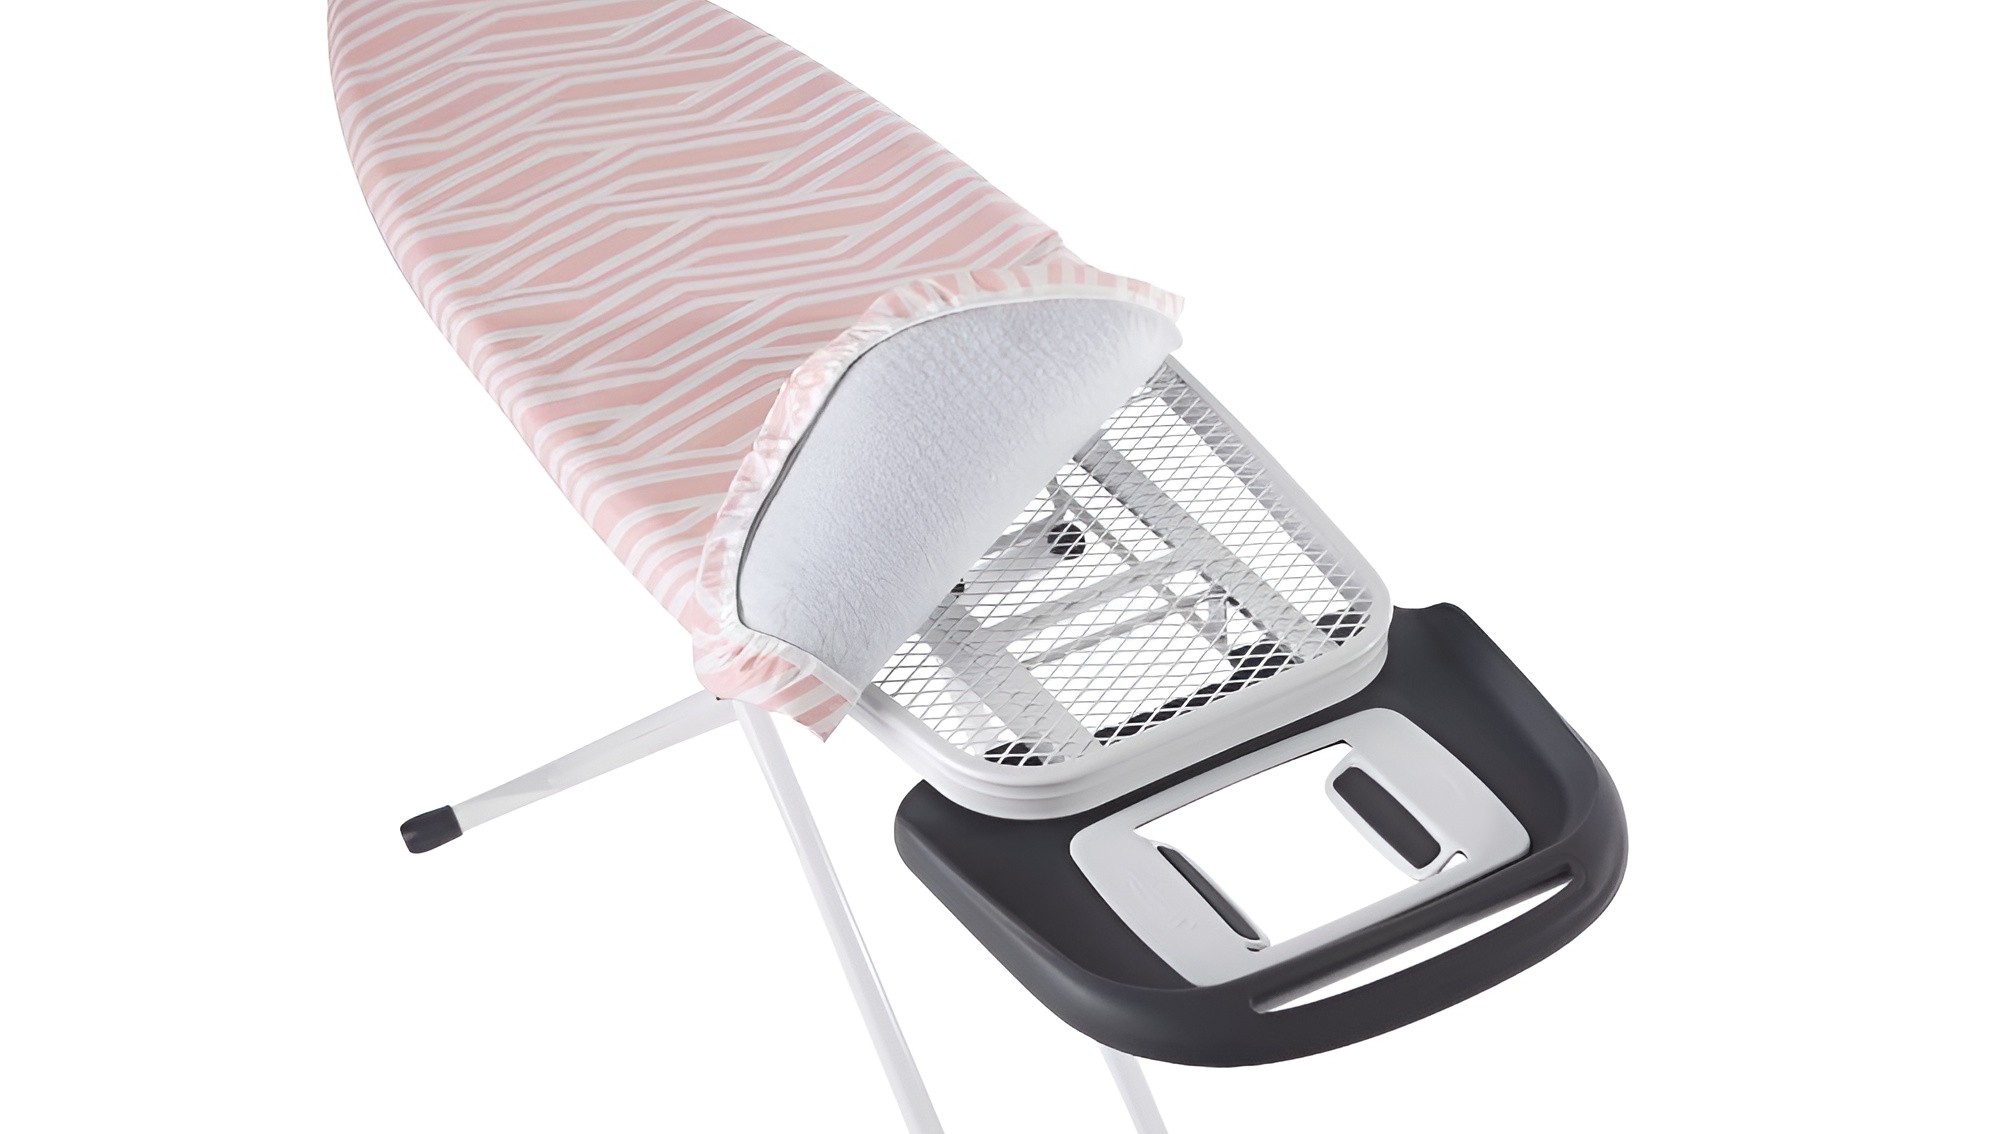 Ironing Board Tips for Steam Ironing Success